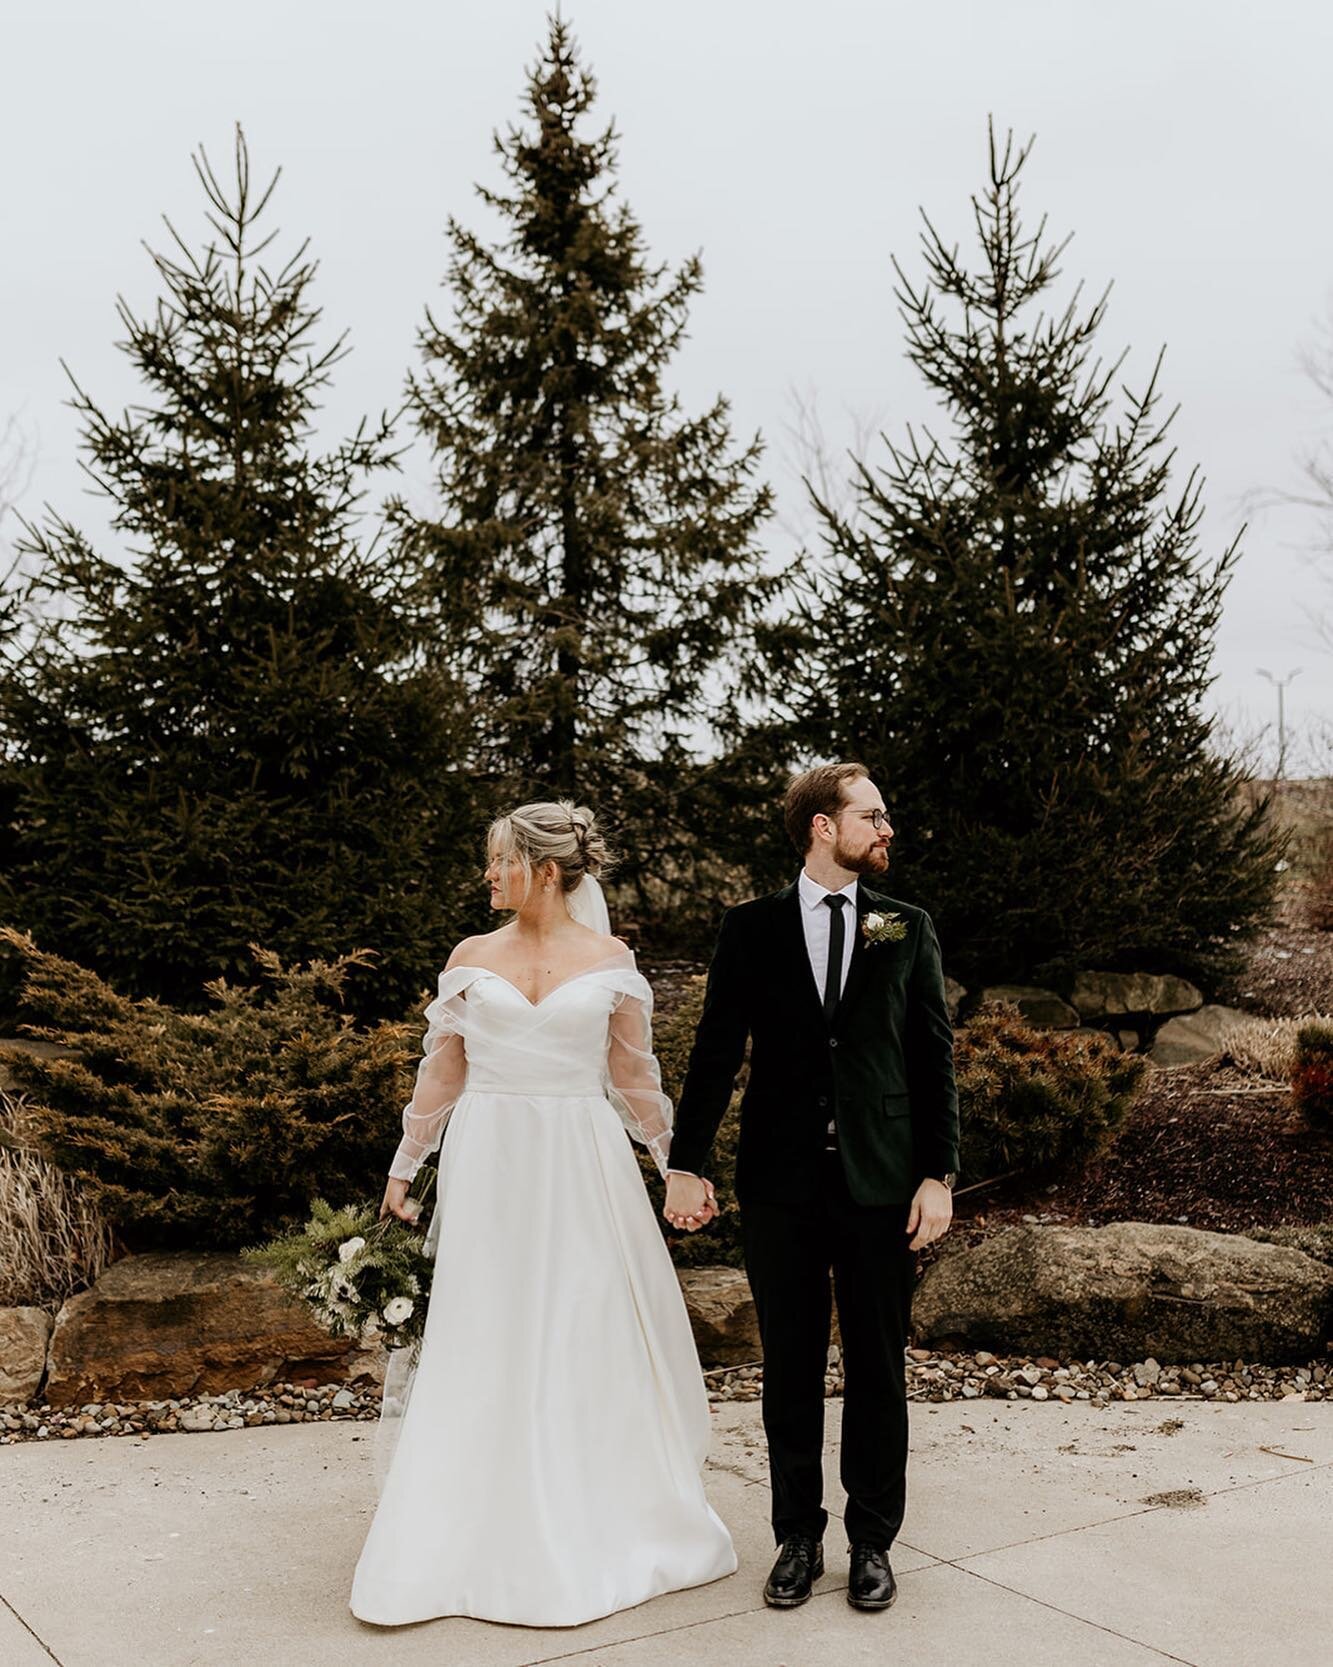 Saying goodbye to winter by paying tribute to this gorgeous winter wedding one more time 😍🌲

📸: @zainasalemphoto